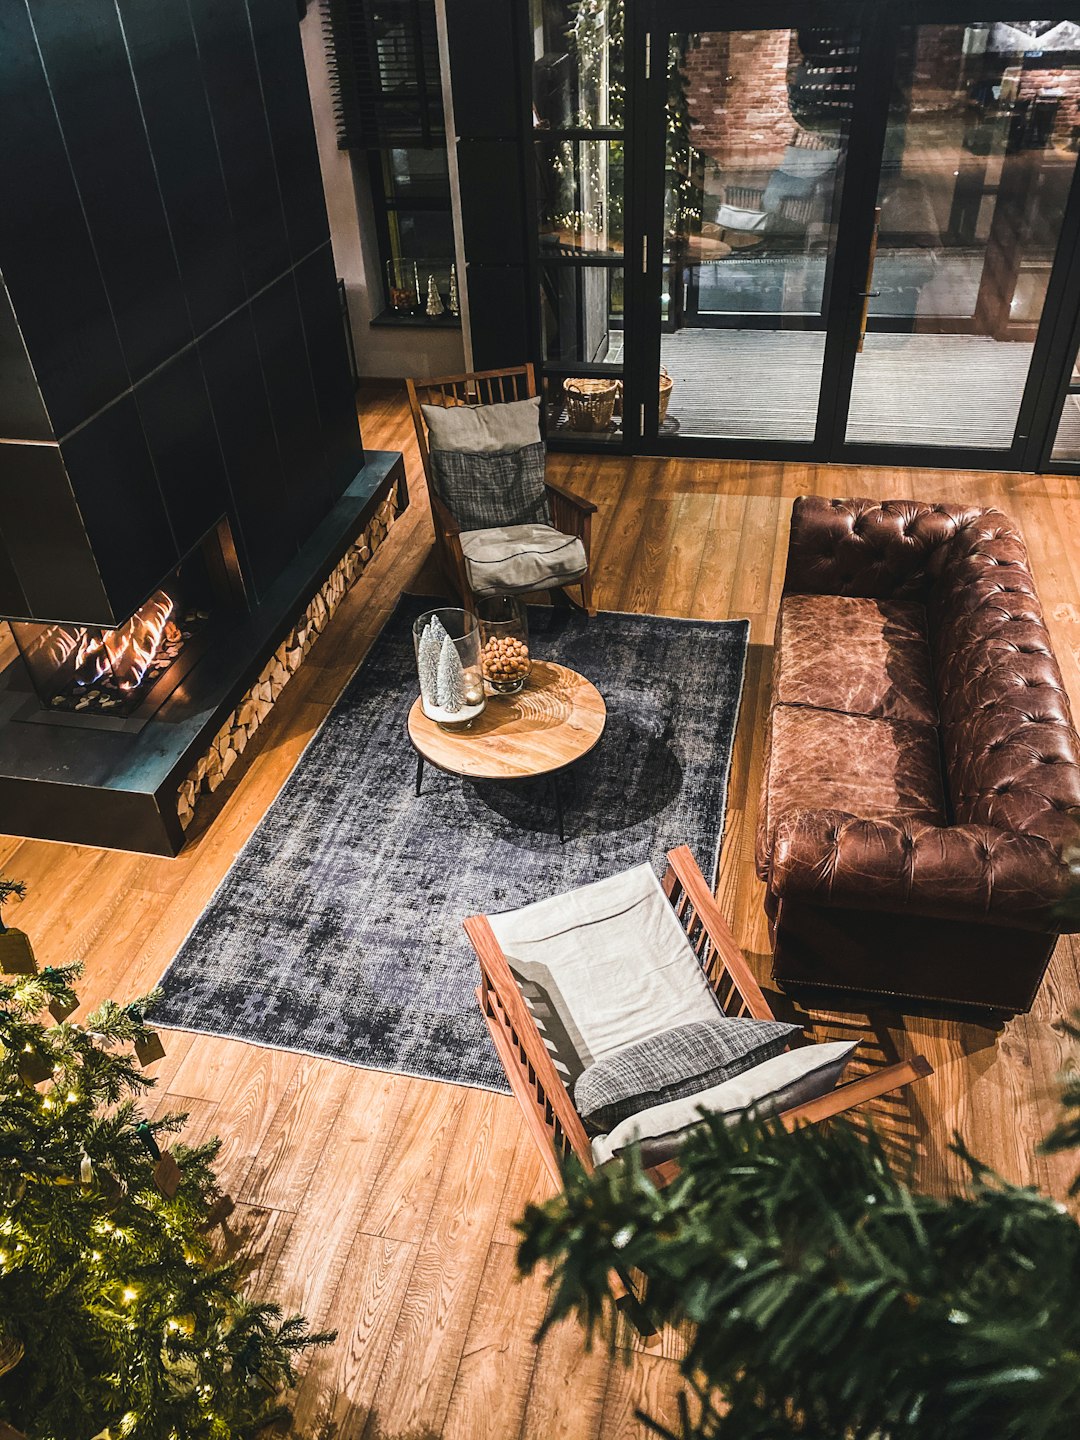 A cozy living room with leather sofas, wooden floors and black fireplace in an industrial style home, seen from above. The scene includes a grey rug on the floor, wooden flooring, large windows, a coffee table adorned with stylish decor, potted plants, and a plush brown couch, creating a warm atmosphere.